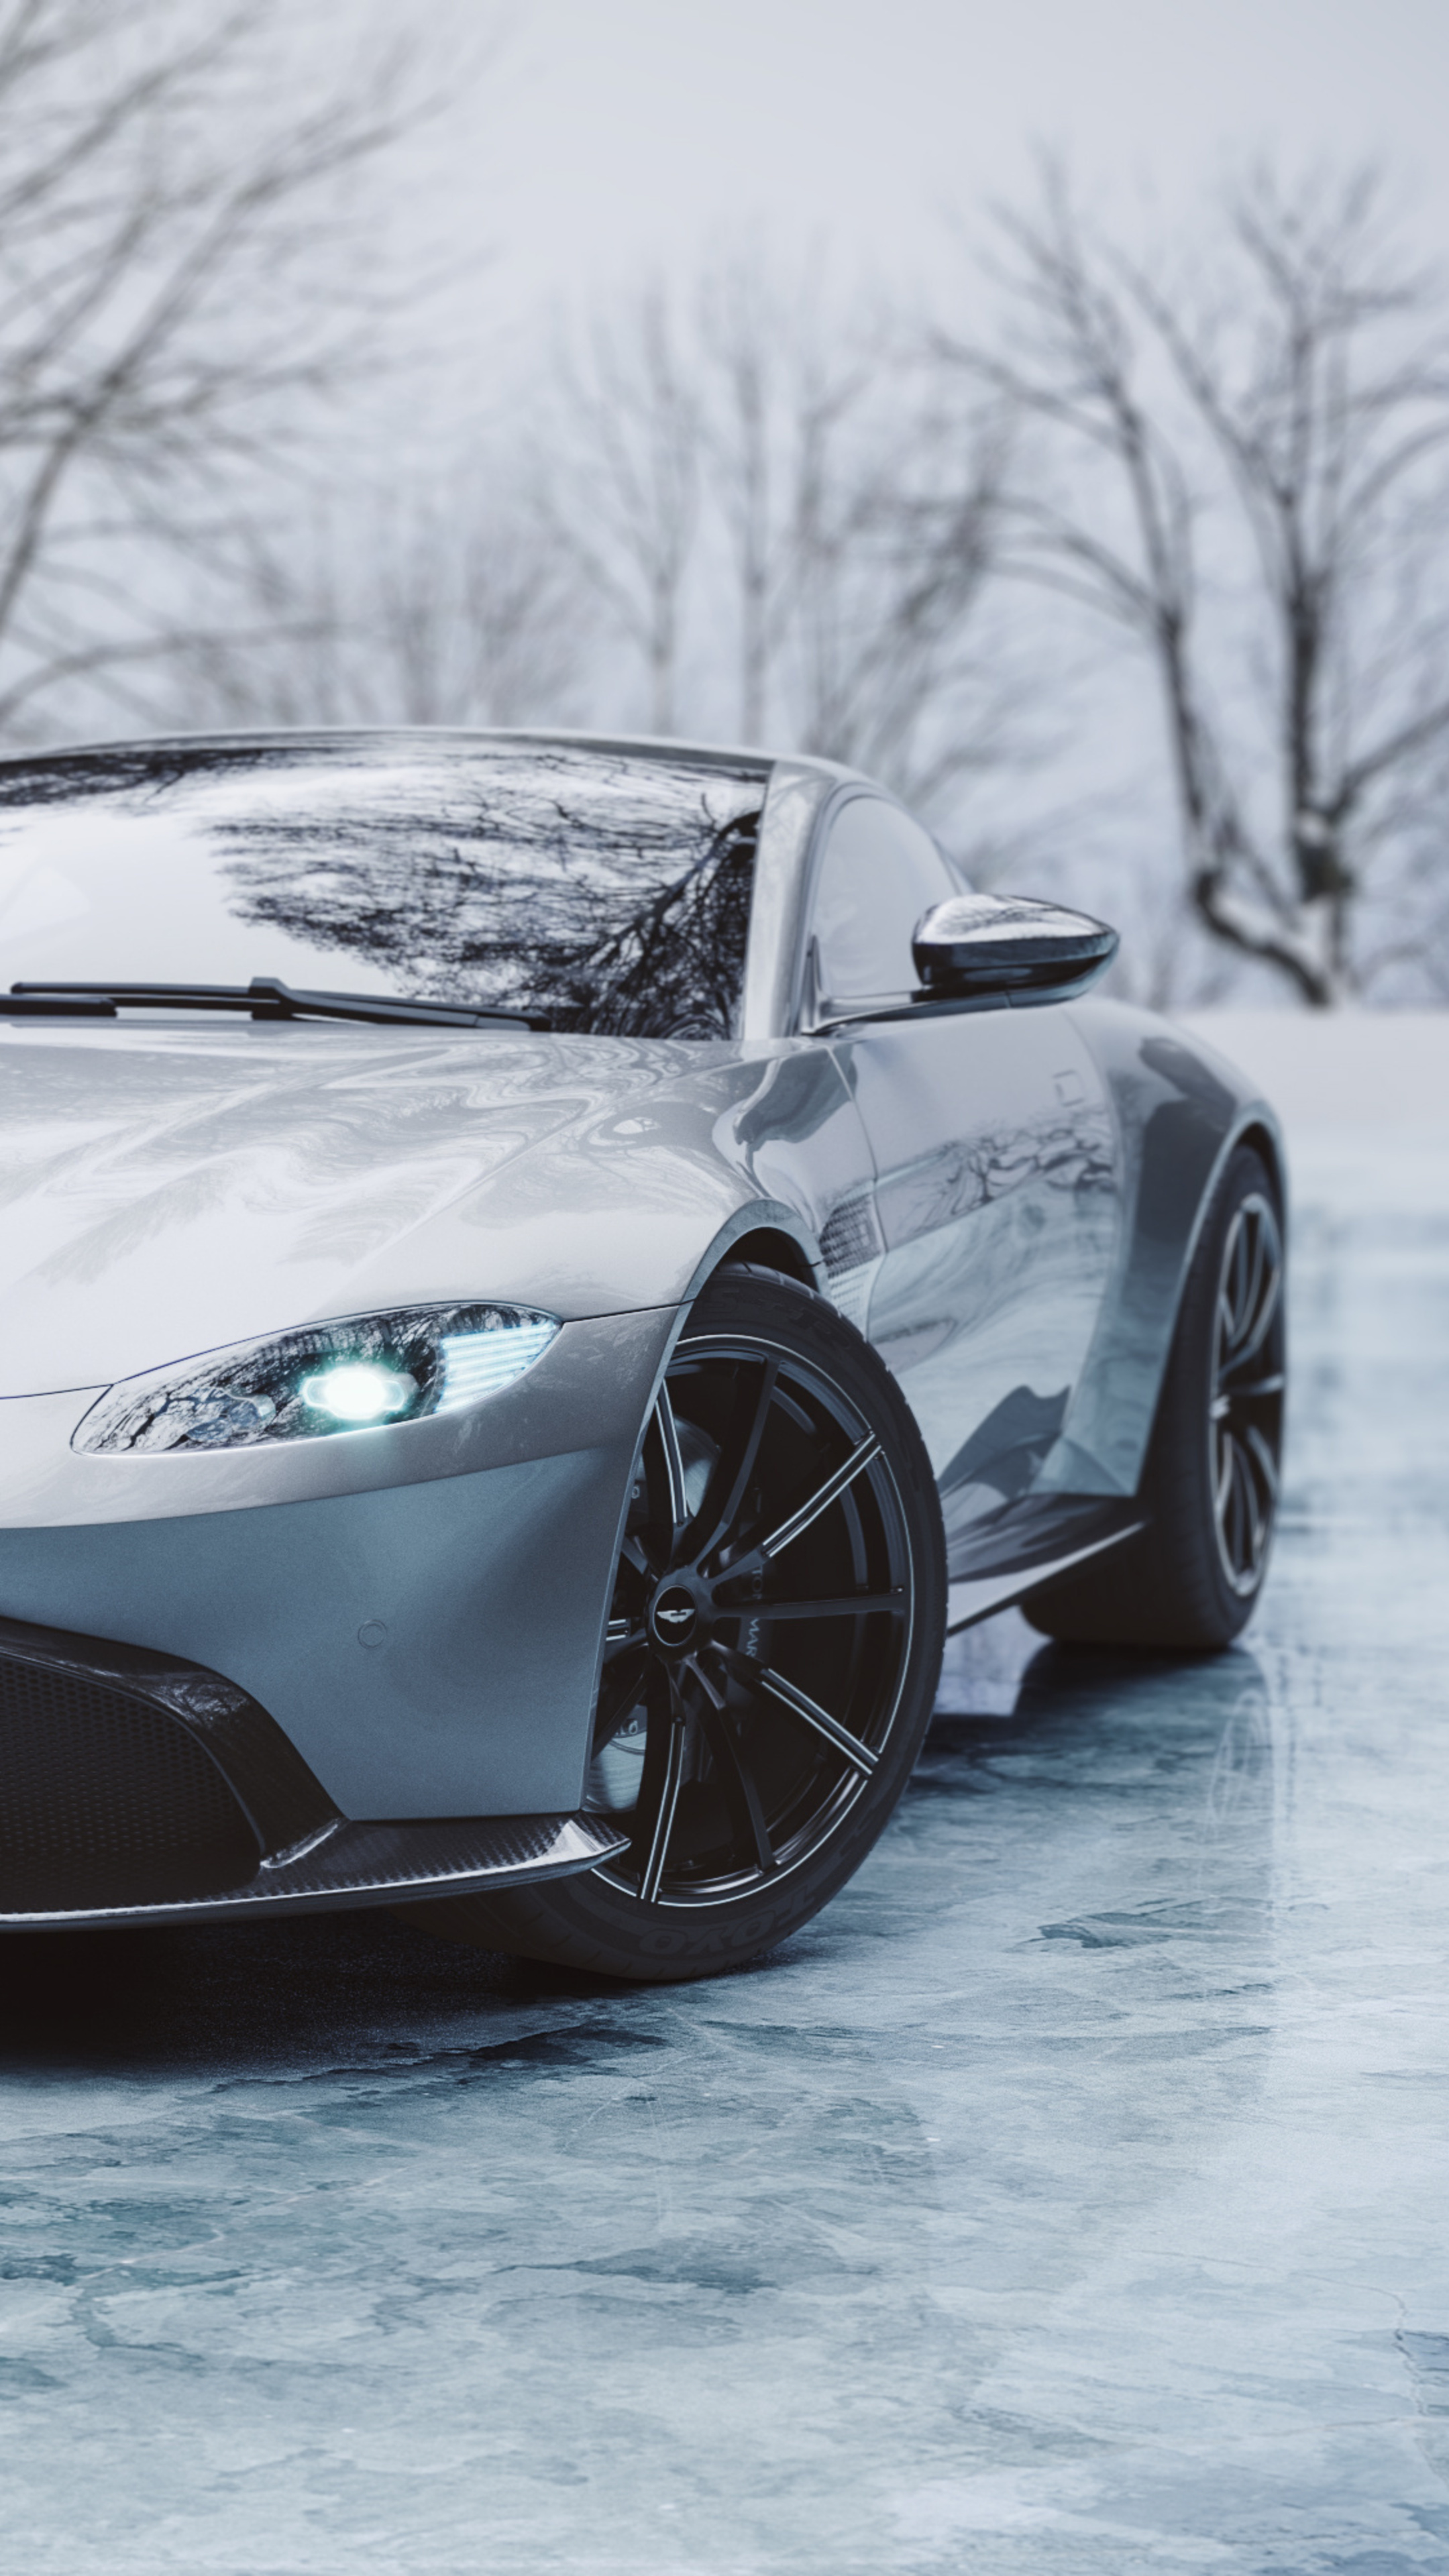 Aston Martin Vantage, Icy cold beauty, Xperia XZ wallpapers, Premium HD backgrounds, 2160x3840 4K Handy